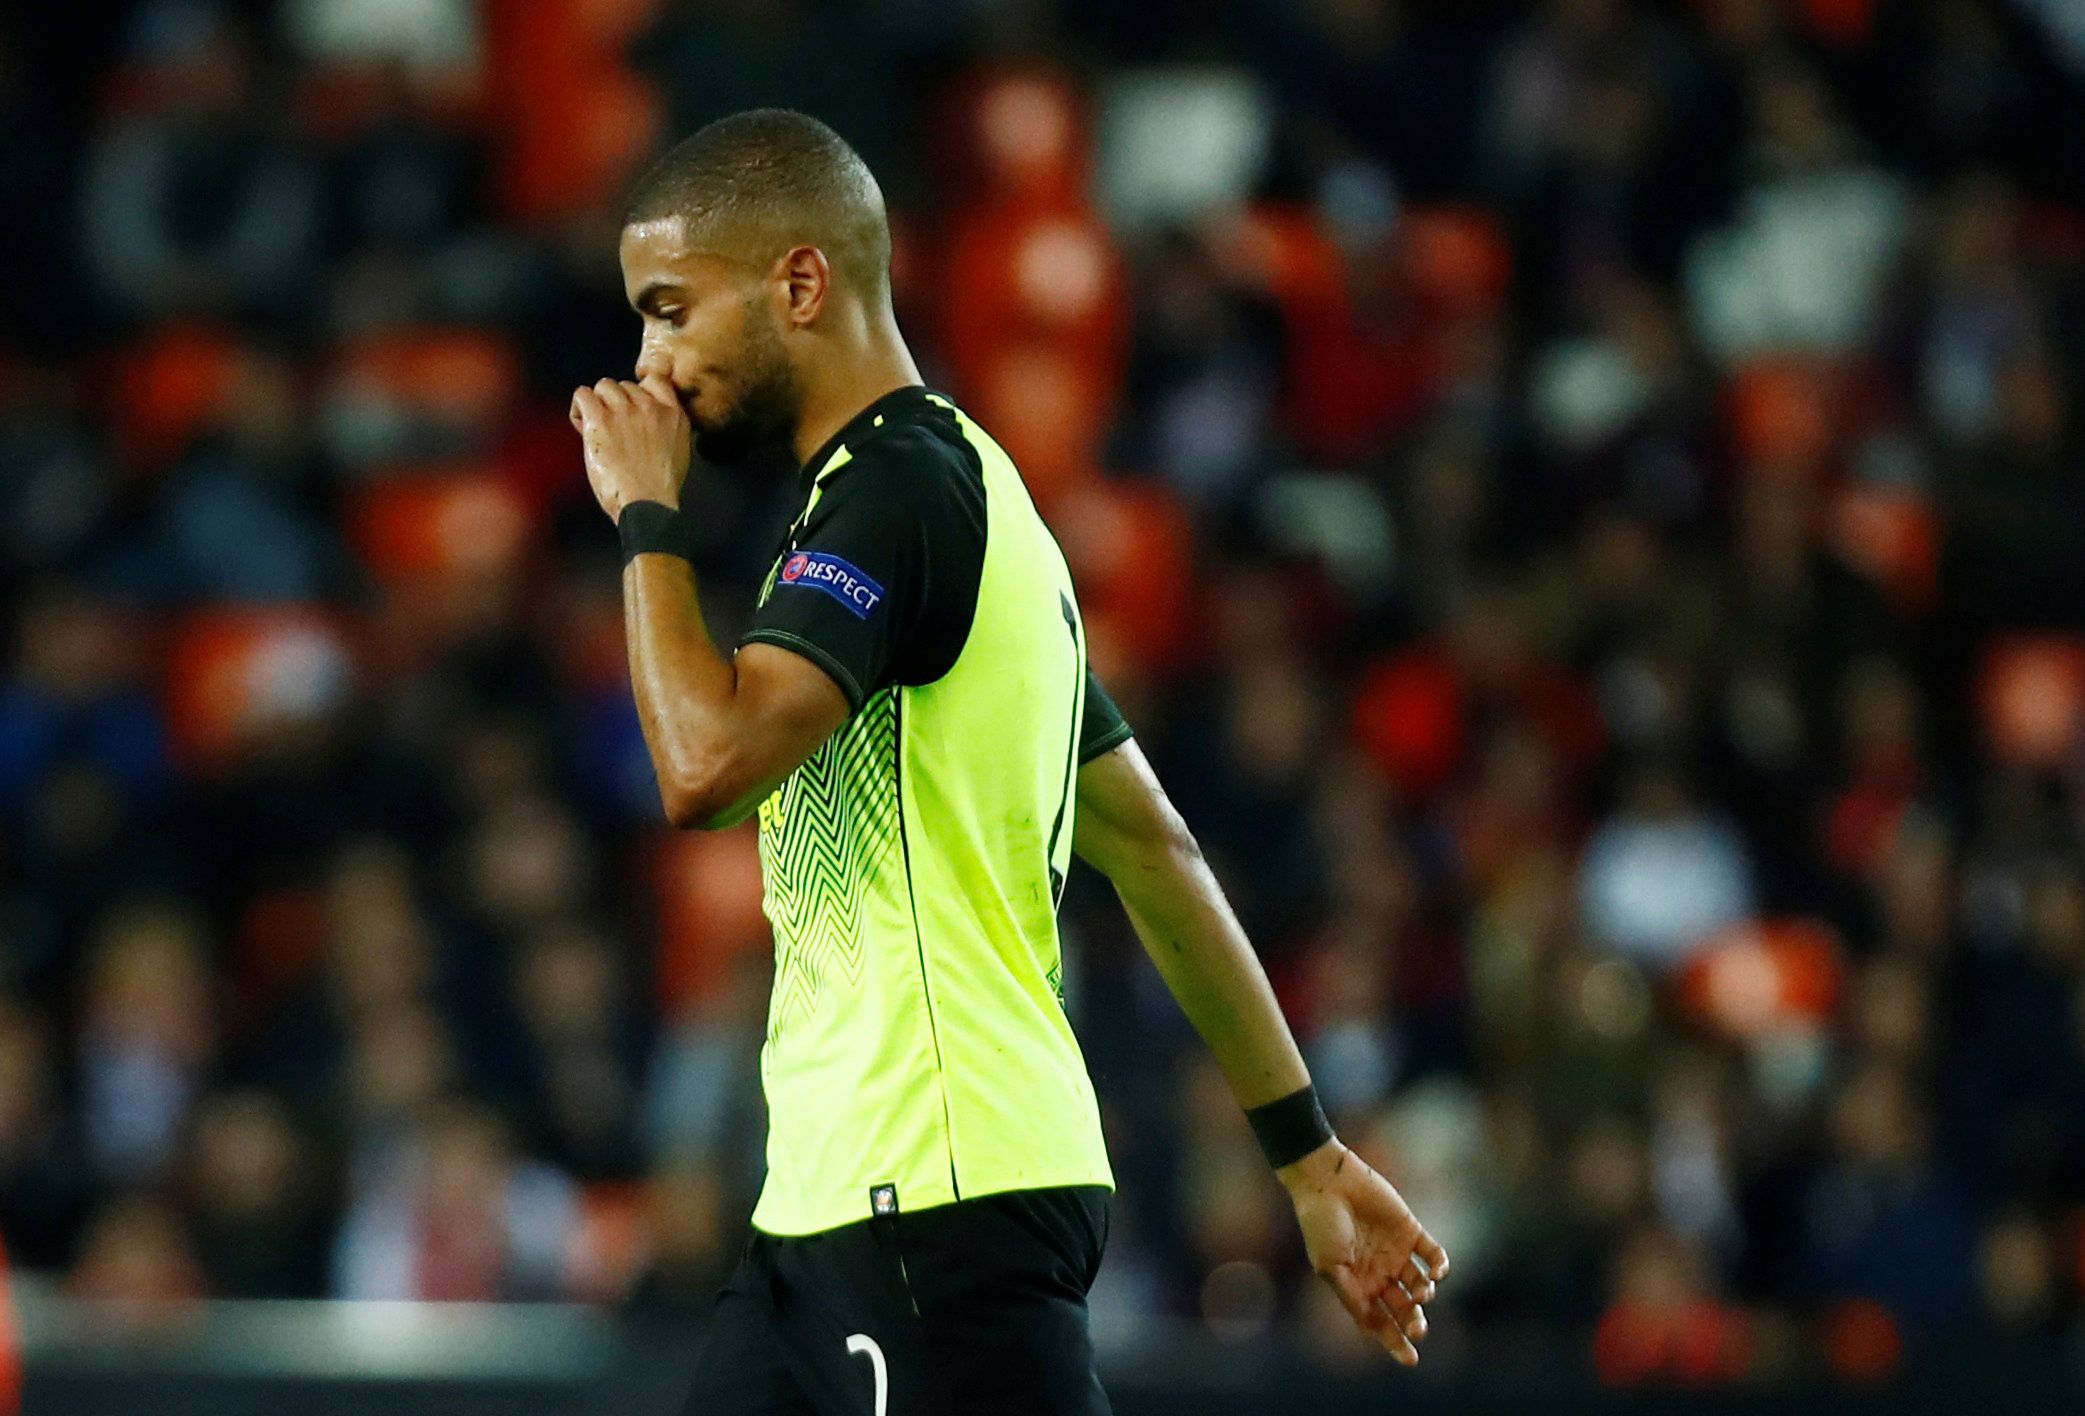 Soccer Football - Europa League - Round of 32 Second Leg - Valencia v Celtic - Mestalla, Valencia, Spain - February 21, 2019  Celtic's Jeremy Toljan looks dejected as he leaves the pitch after being shown a red card  REUTERS/Juan Medina